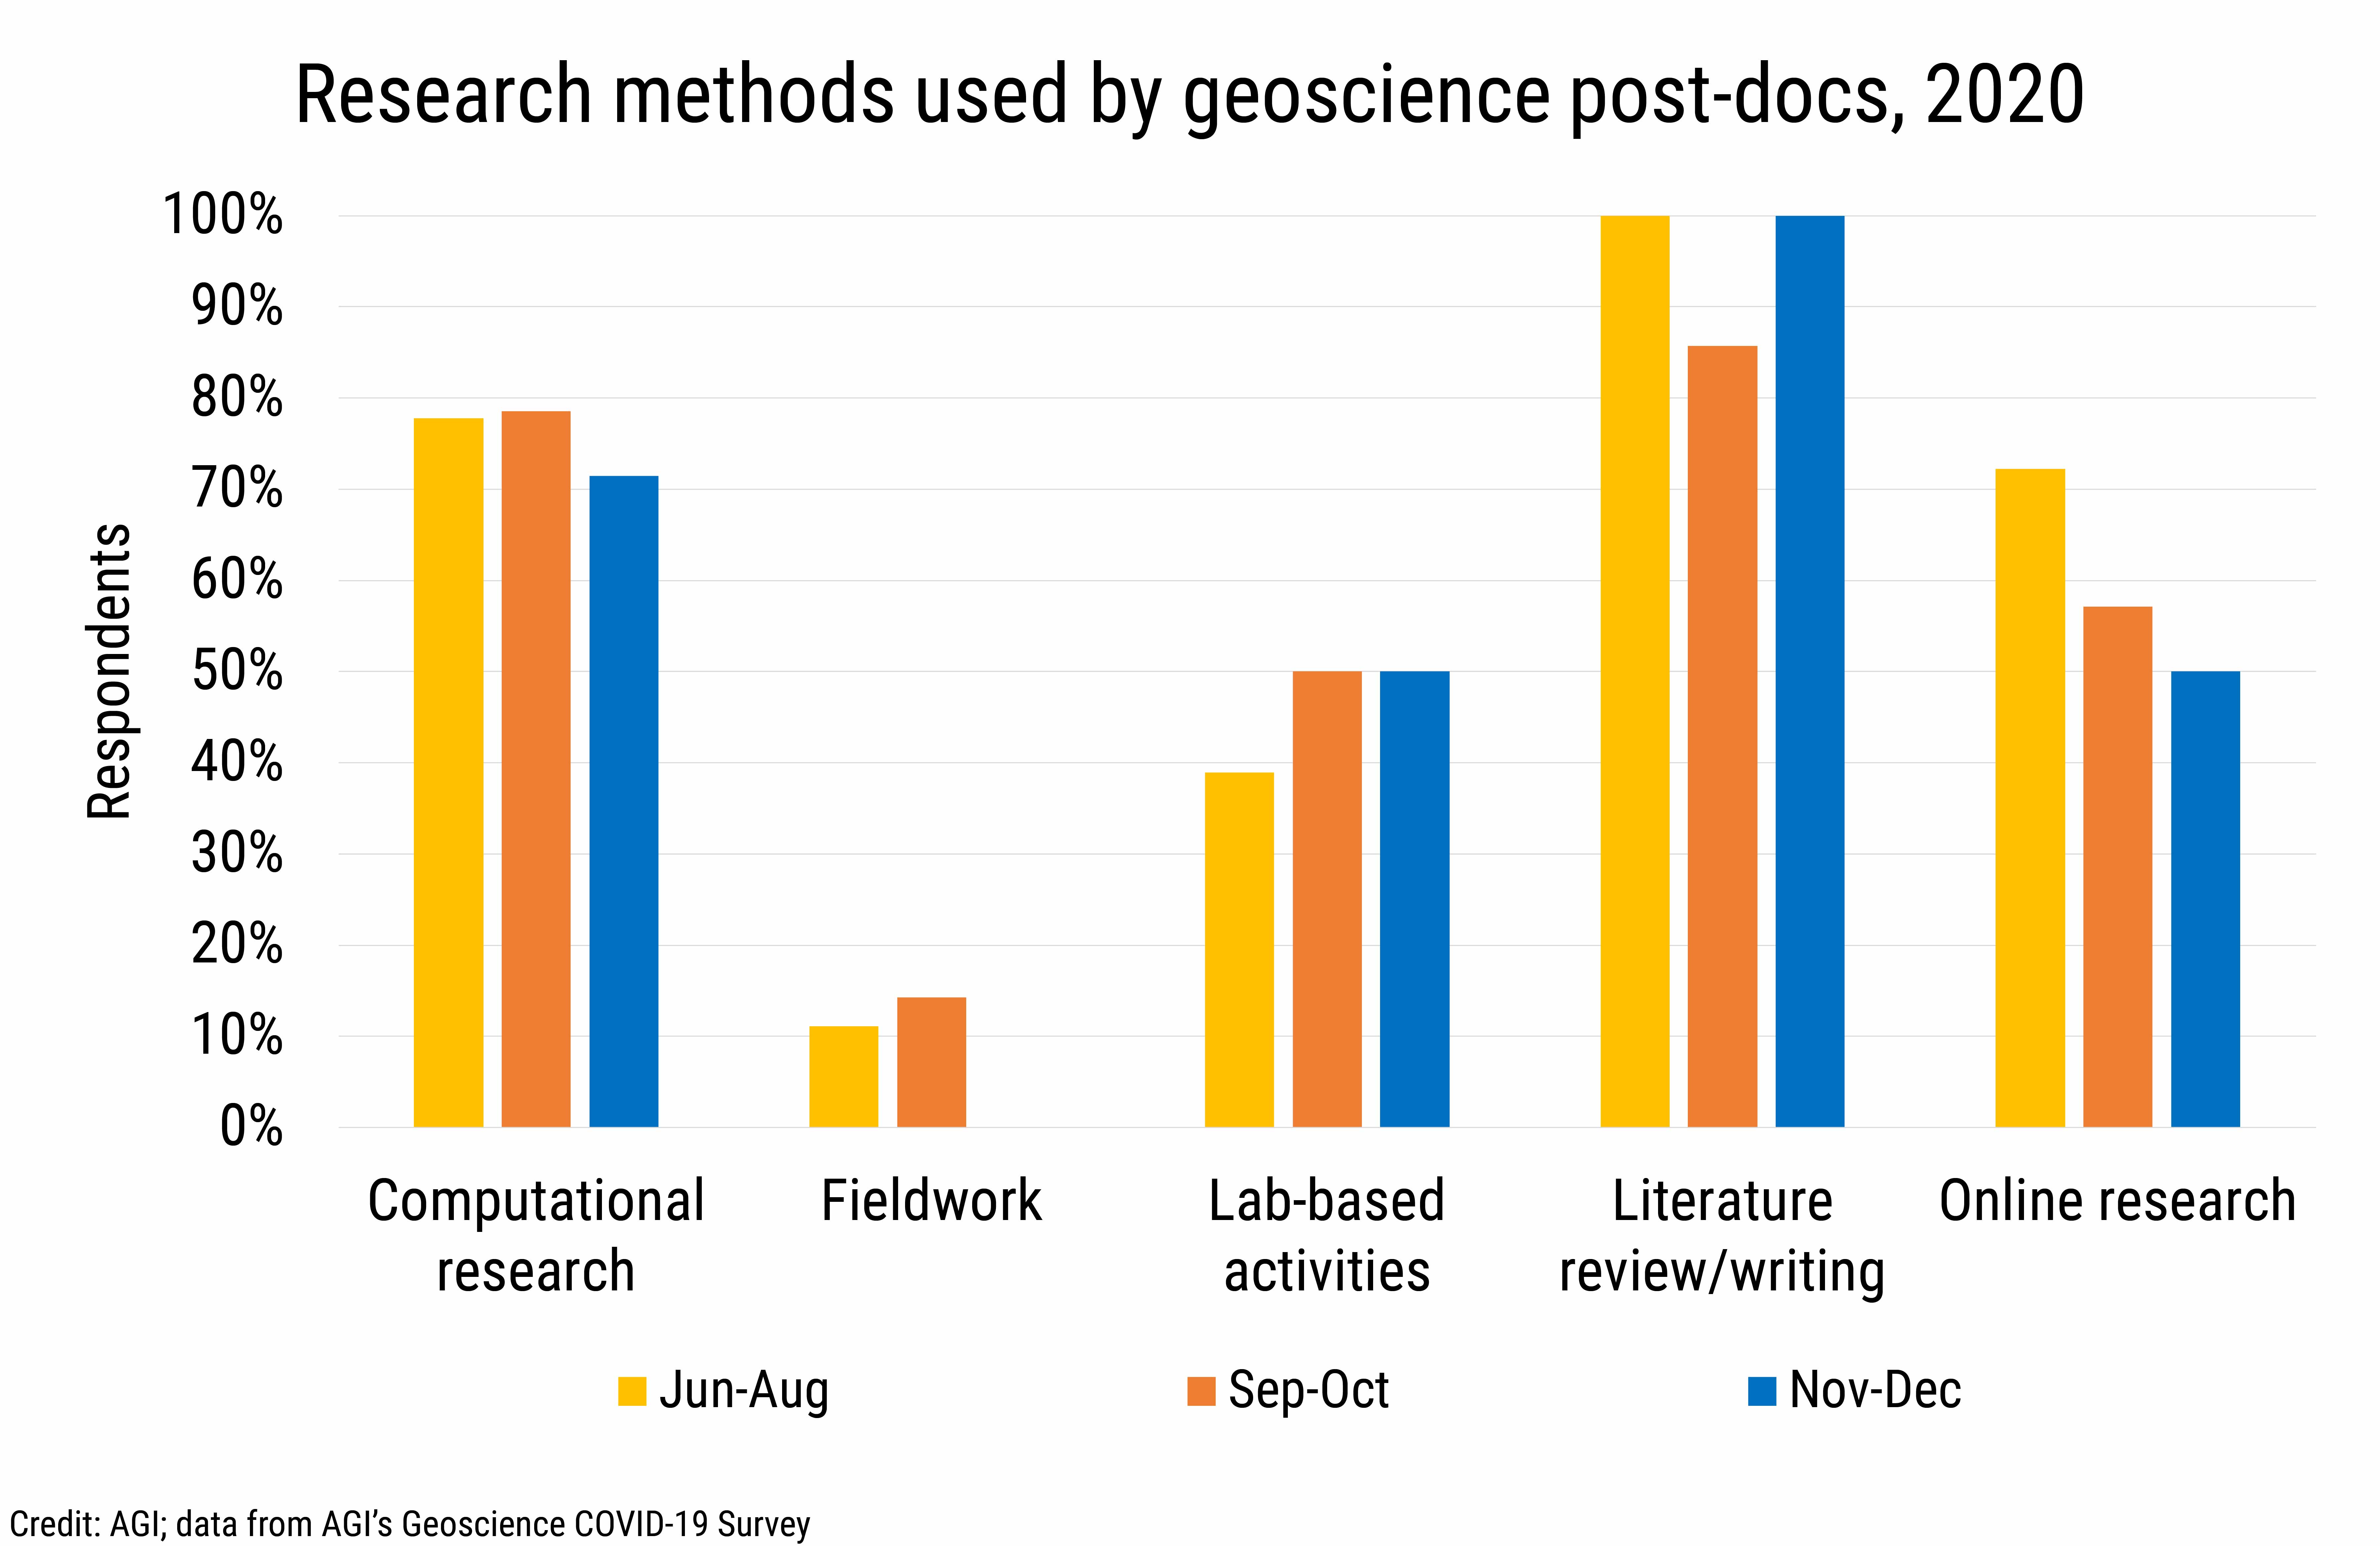 DB_2021-002 chart 03: Research methods used by geoscience post-docs, 2020 (Credit: AGI; data from AGI's Geoscience COVID-19 Survey)